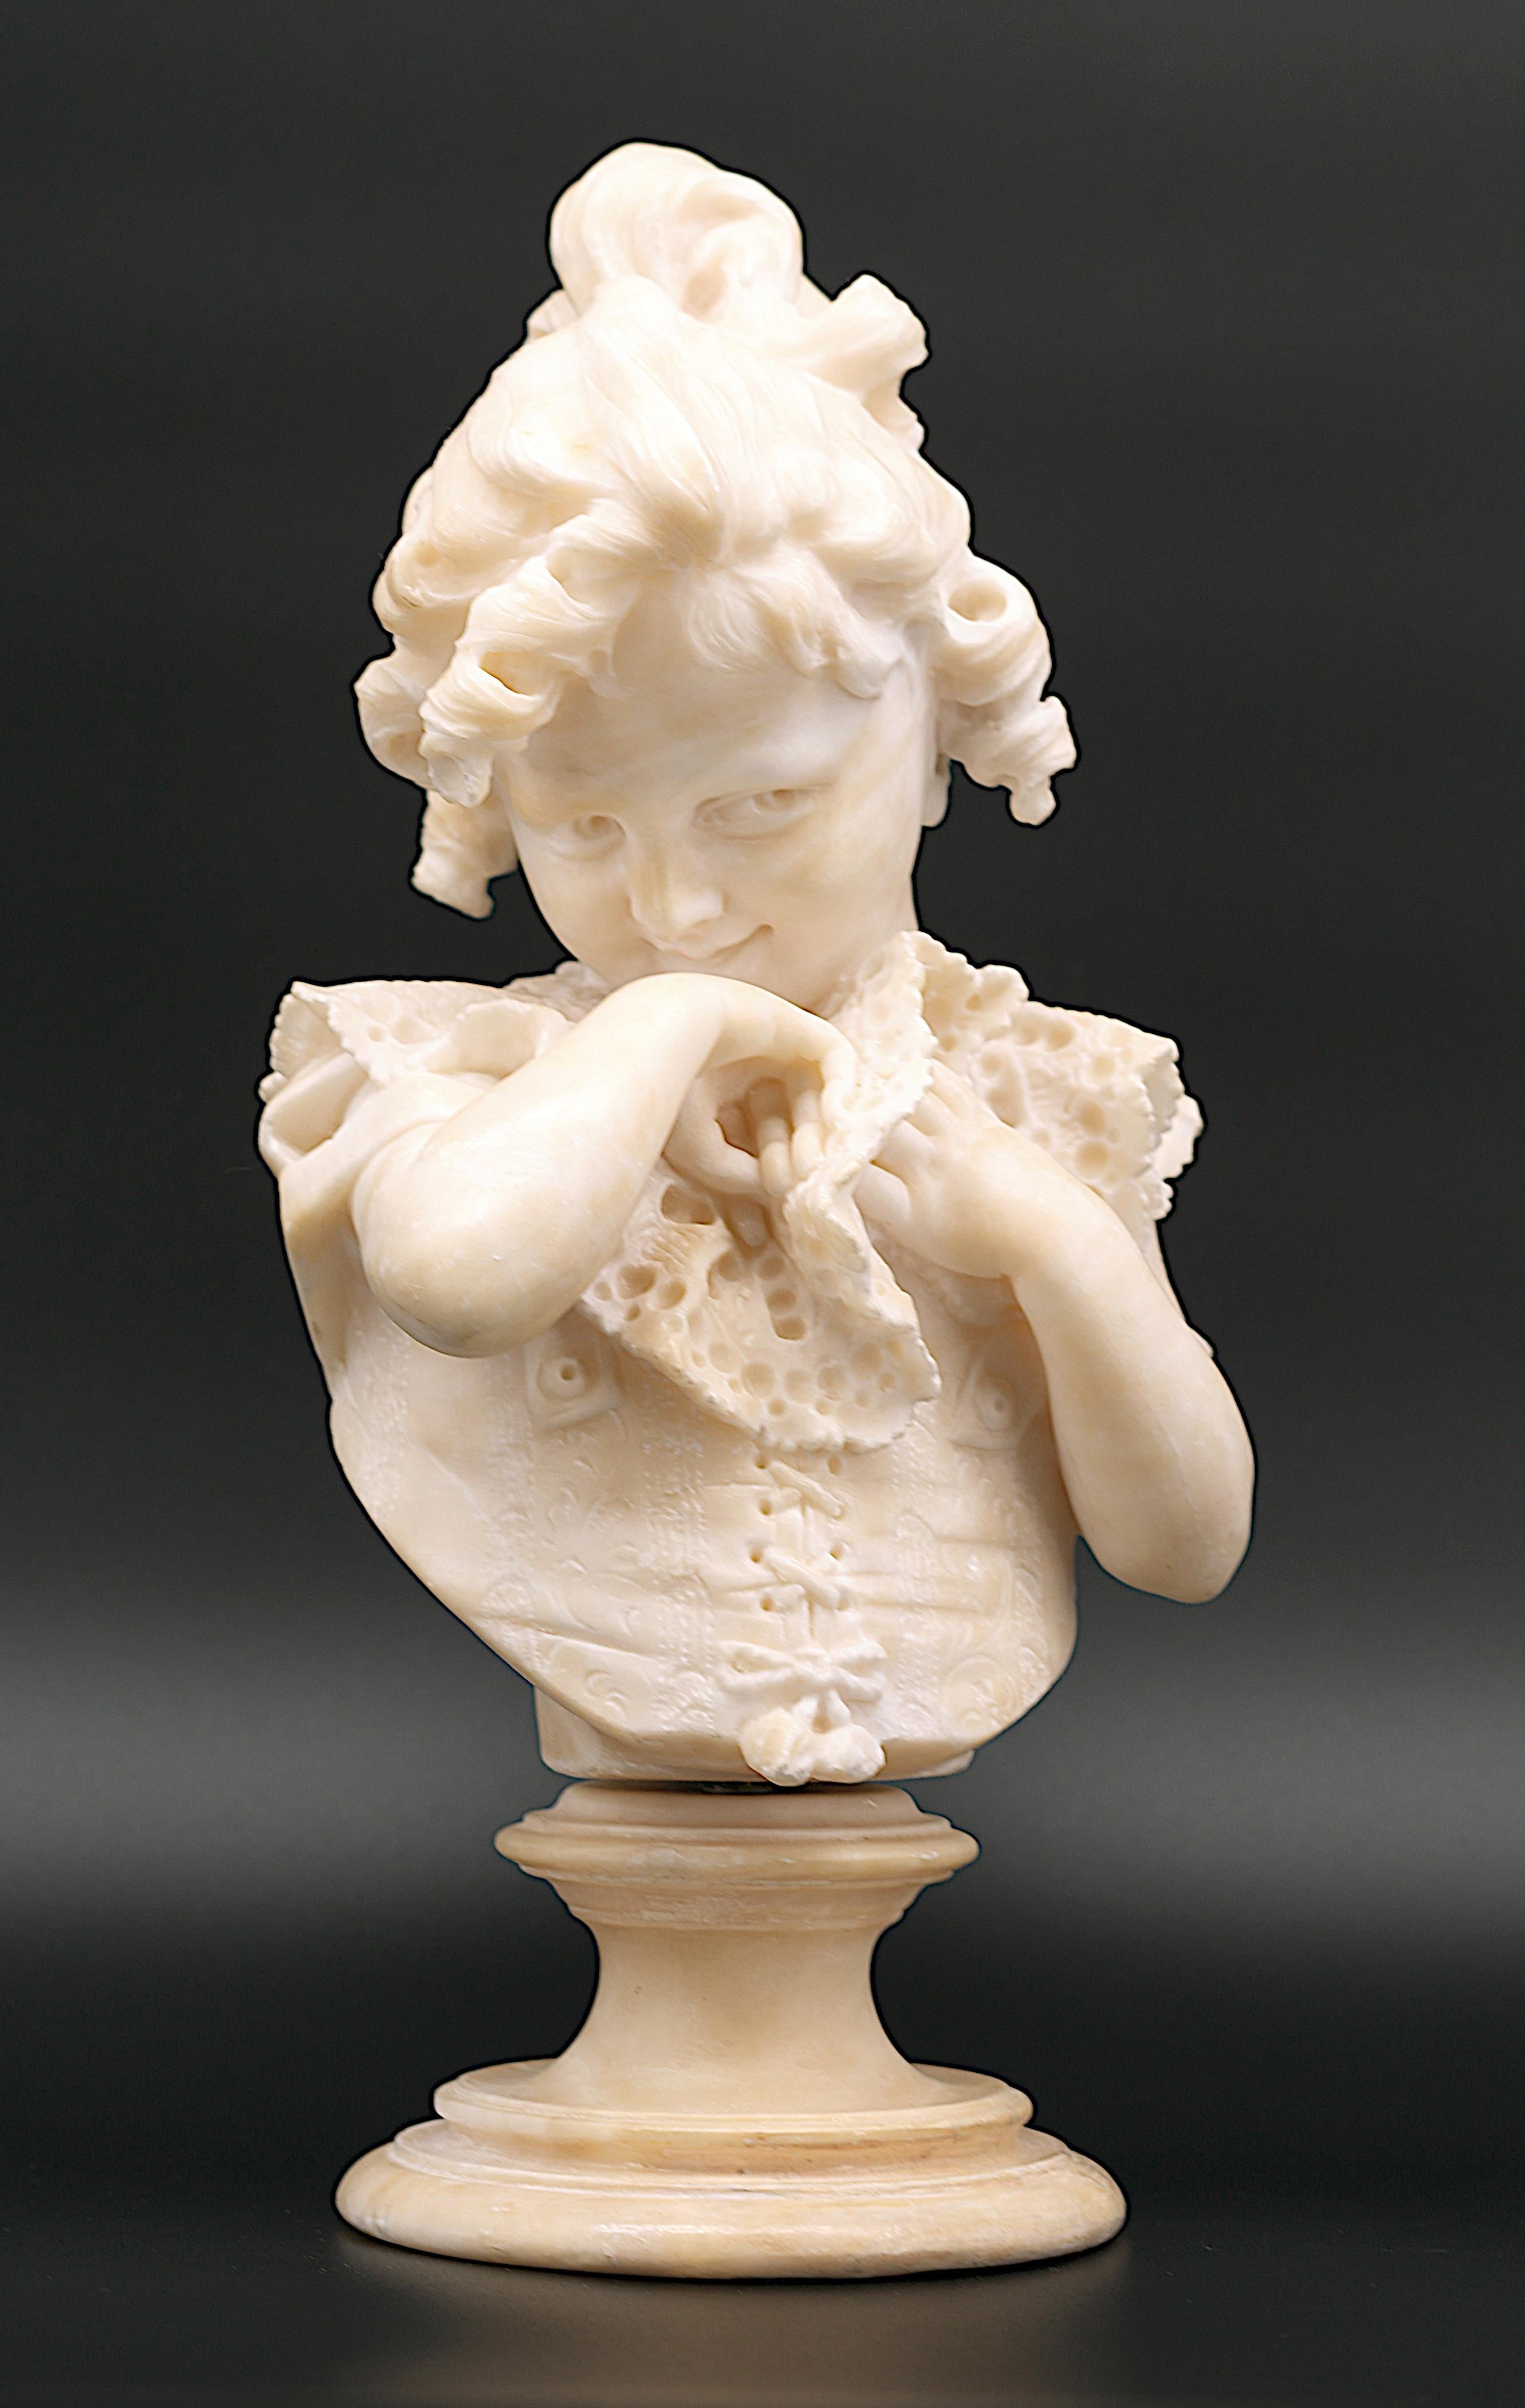 Little girl alabaster bust sculpture by Emilio FIASCHI (1858-1941), France, 1890s. Direct carving. The details of the small corset and the lace collar are very finely done. The remarkable work of an outstanding sculptor. Height : 14.5